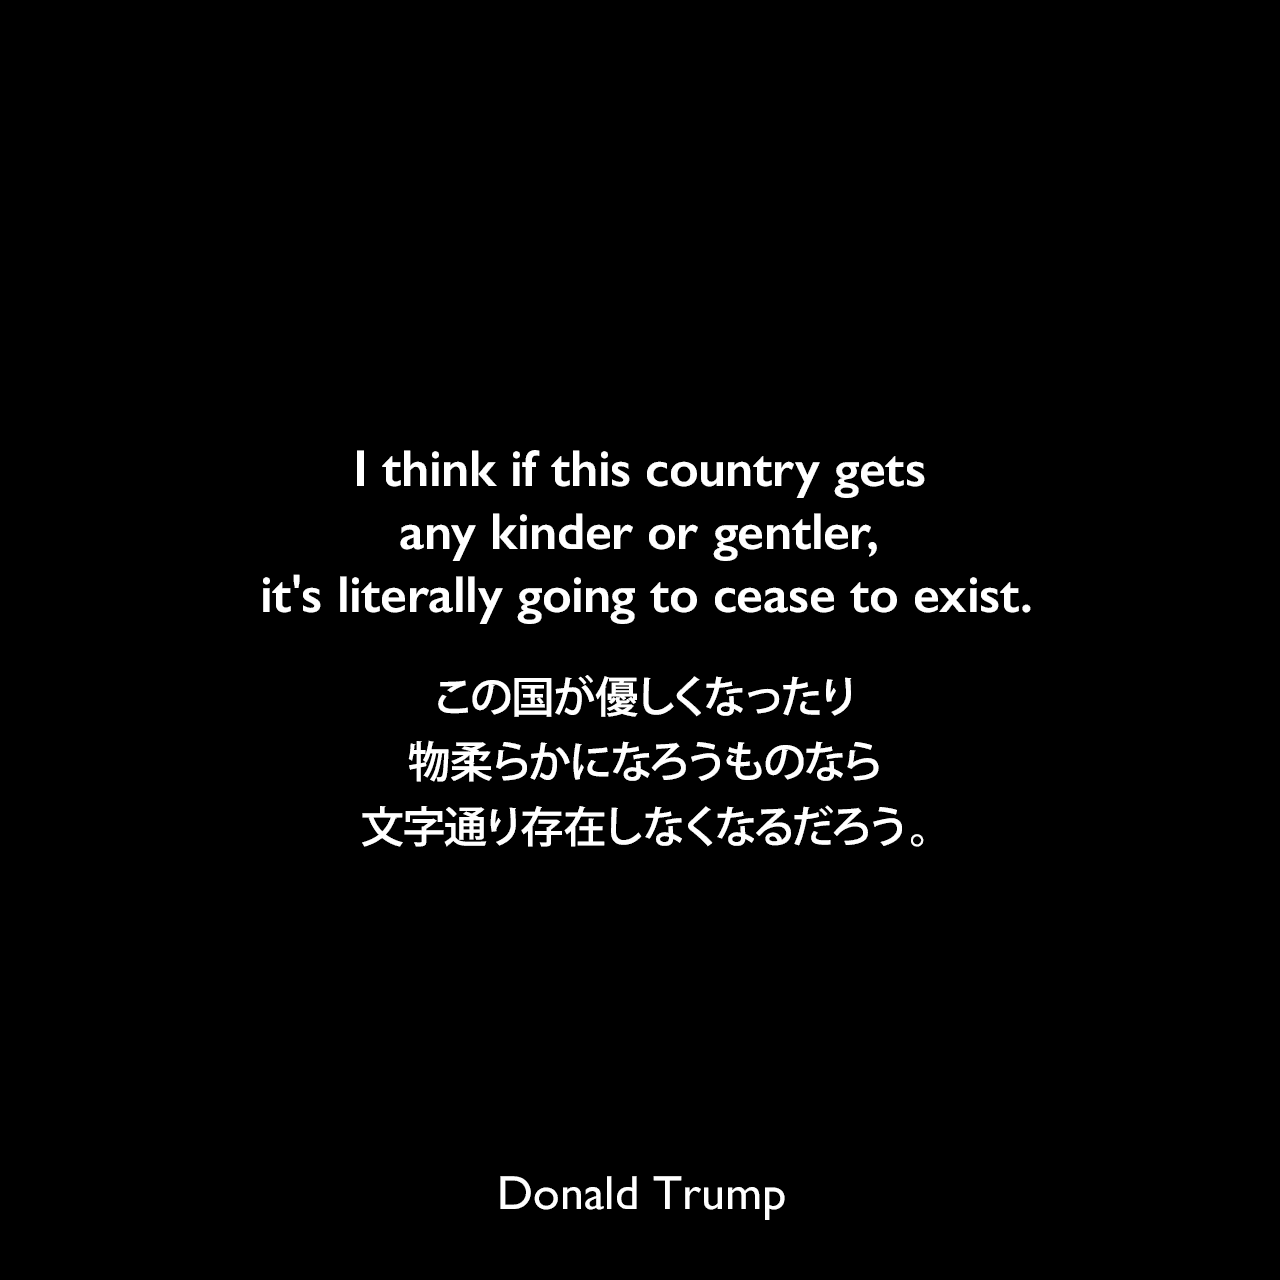 I think if this country gets any kinder or gentler, it's literally going to cease to exist.この国が優しくなったり物柔らかになろうものなら、文字通り存在しなくなるだろう。- 1990年3月のプレイボーイ誌よりDonald Trump